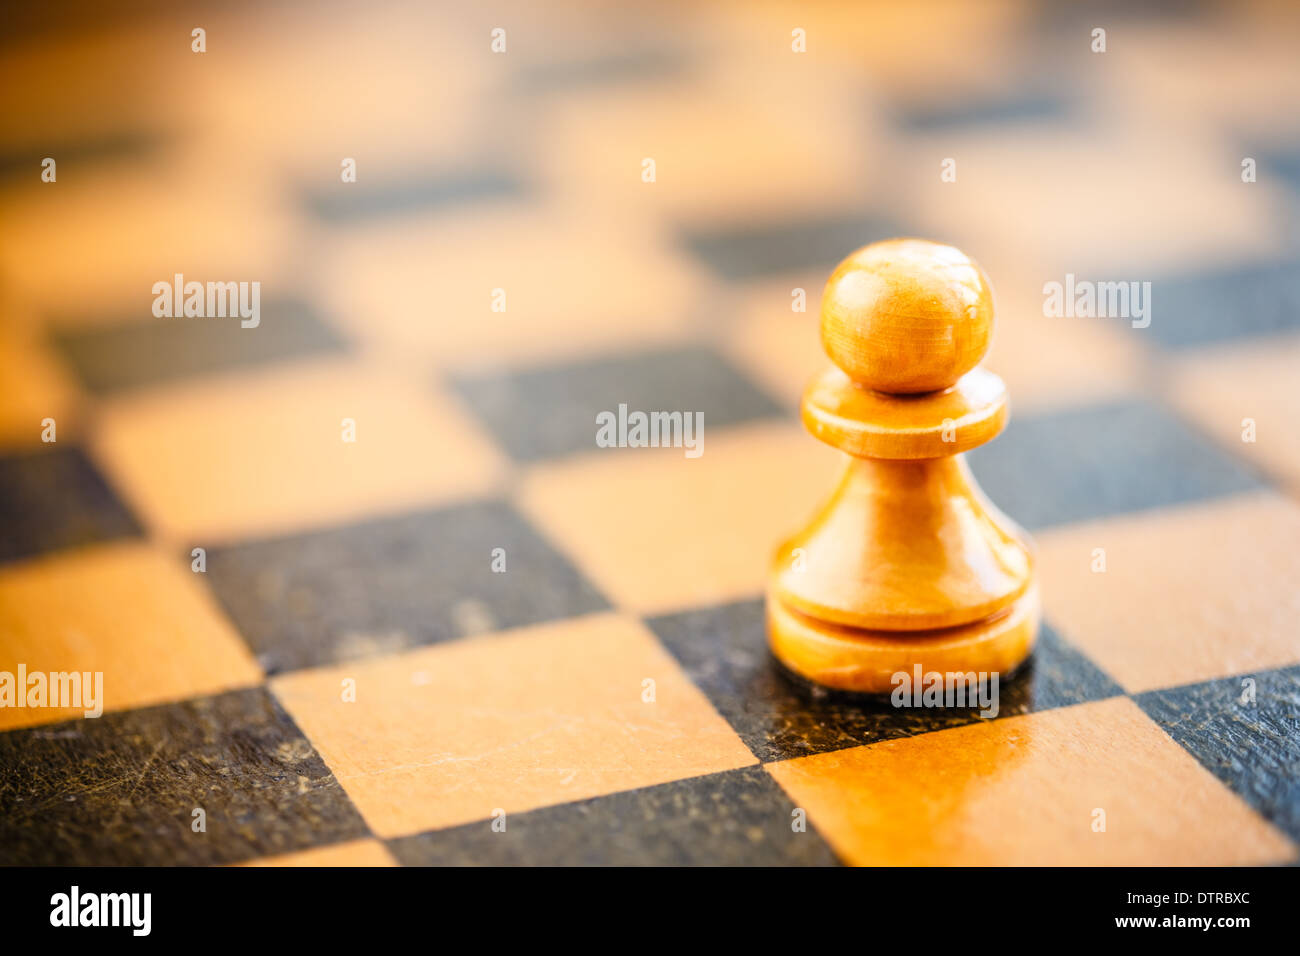 Chess white pawn standing on old vintage chessboard Stock Photo